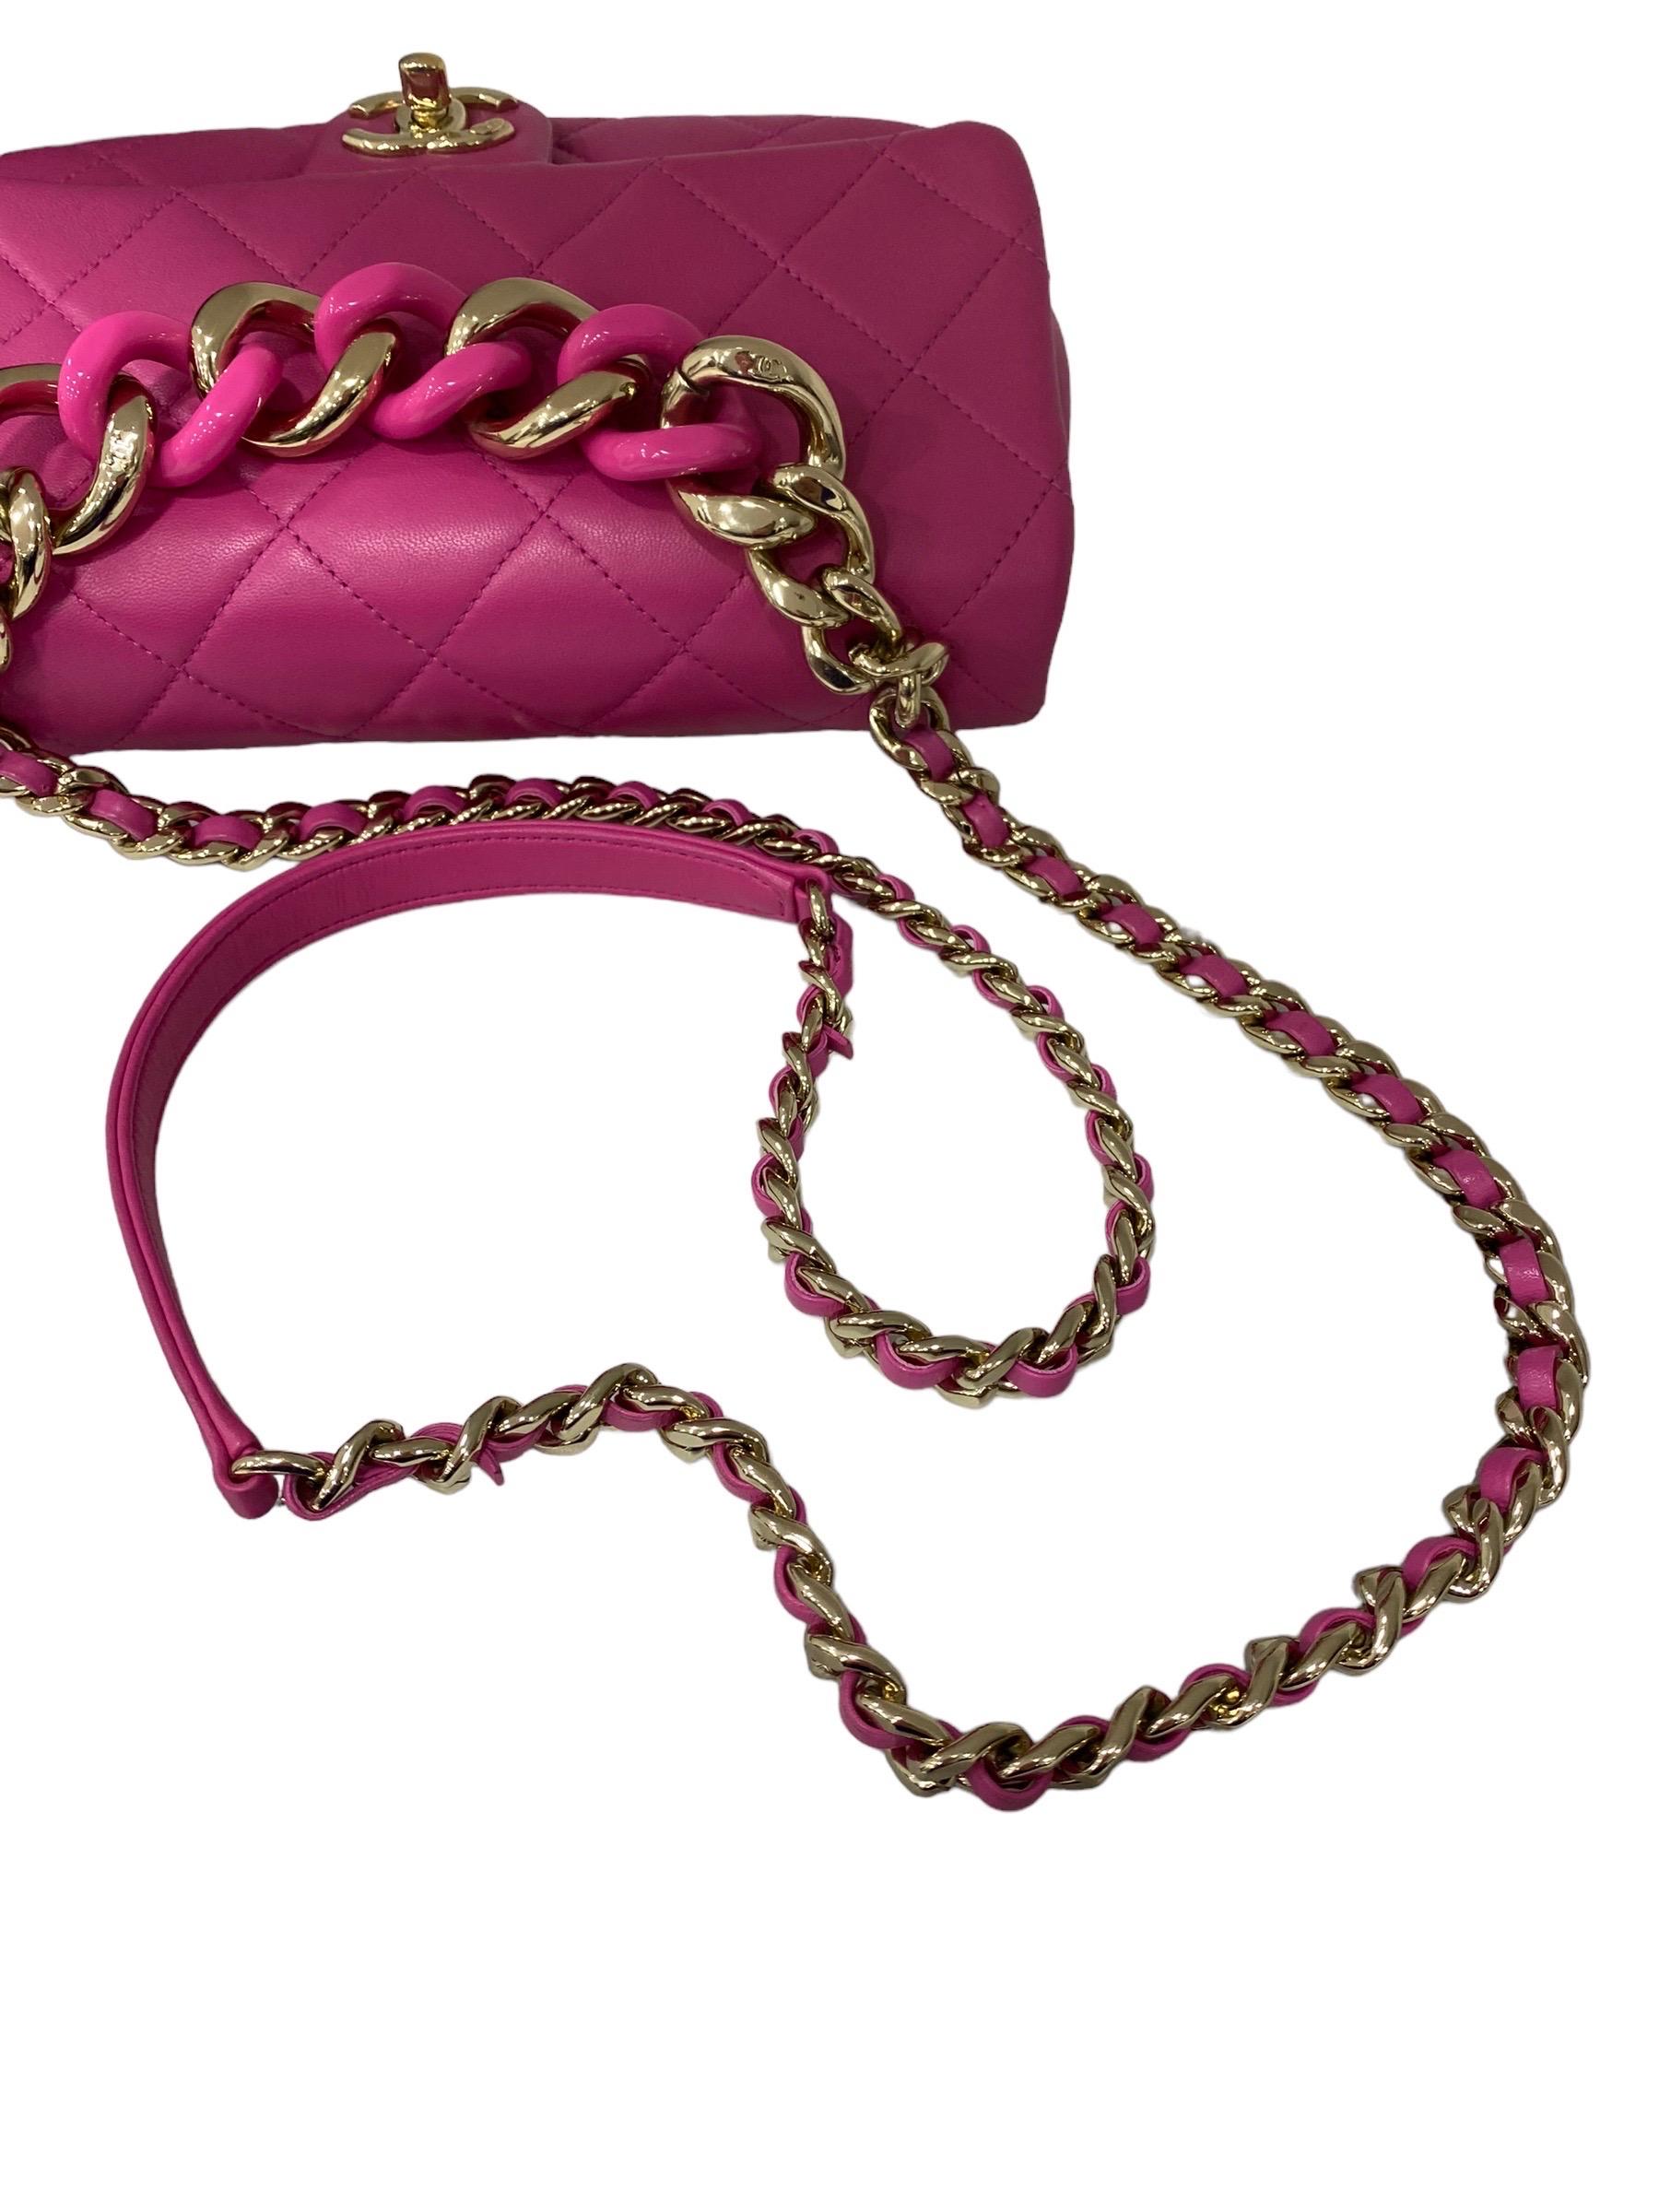 2021 Chanel 19 Pink Shoulder Bag  In Good Condition For Sale In Torre Del Greco, IT